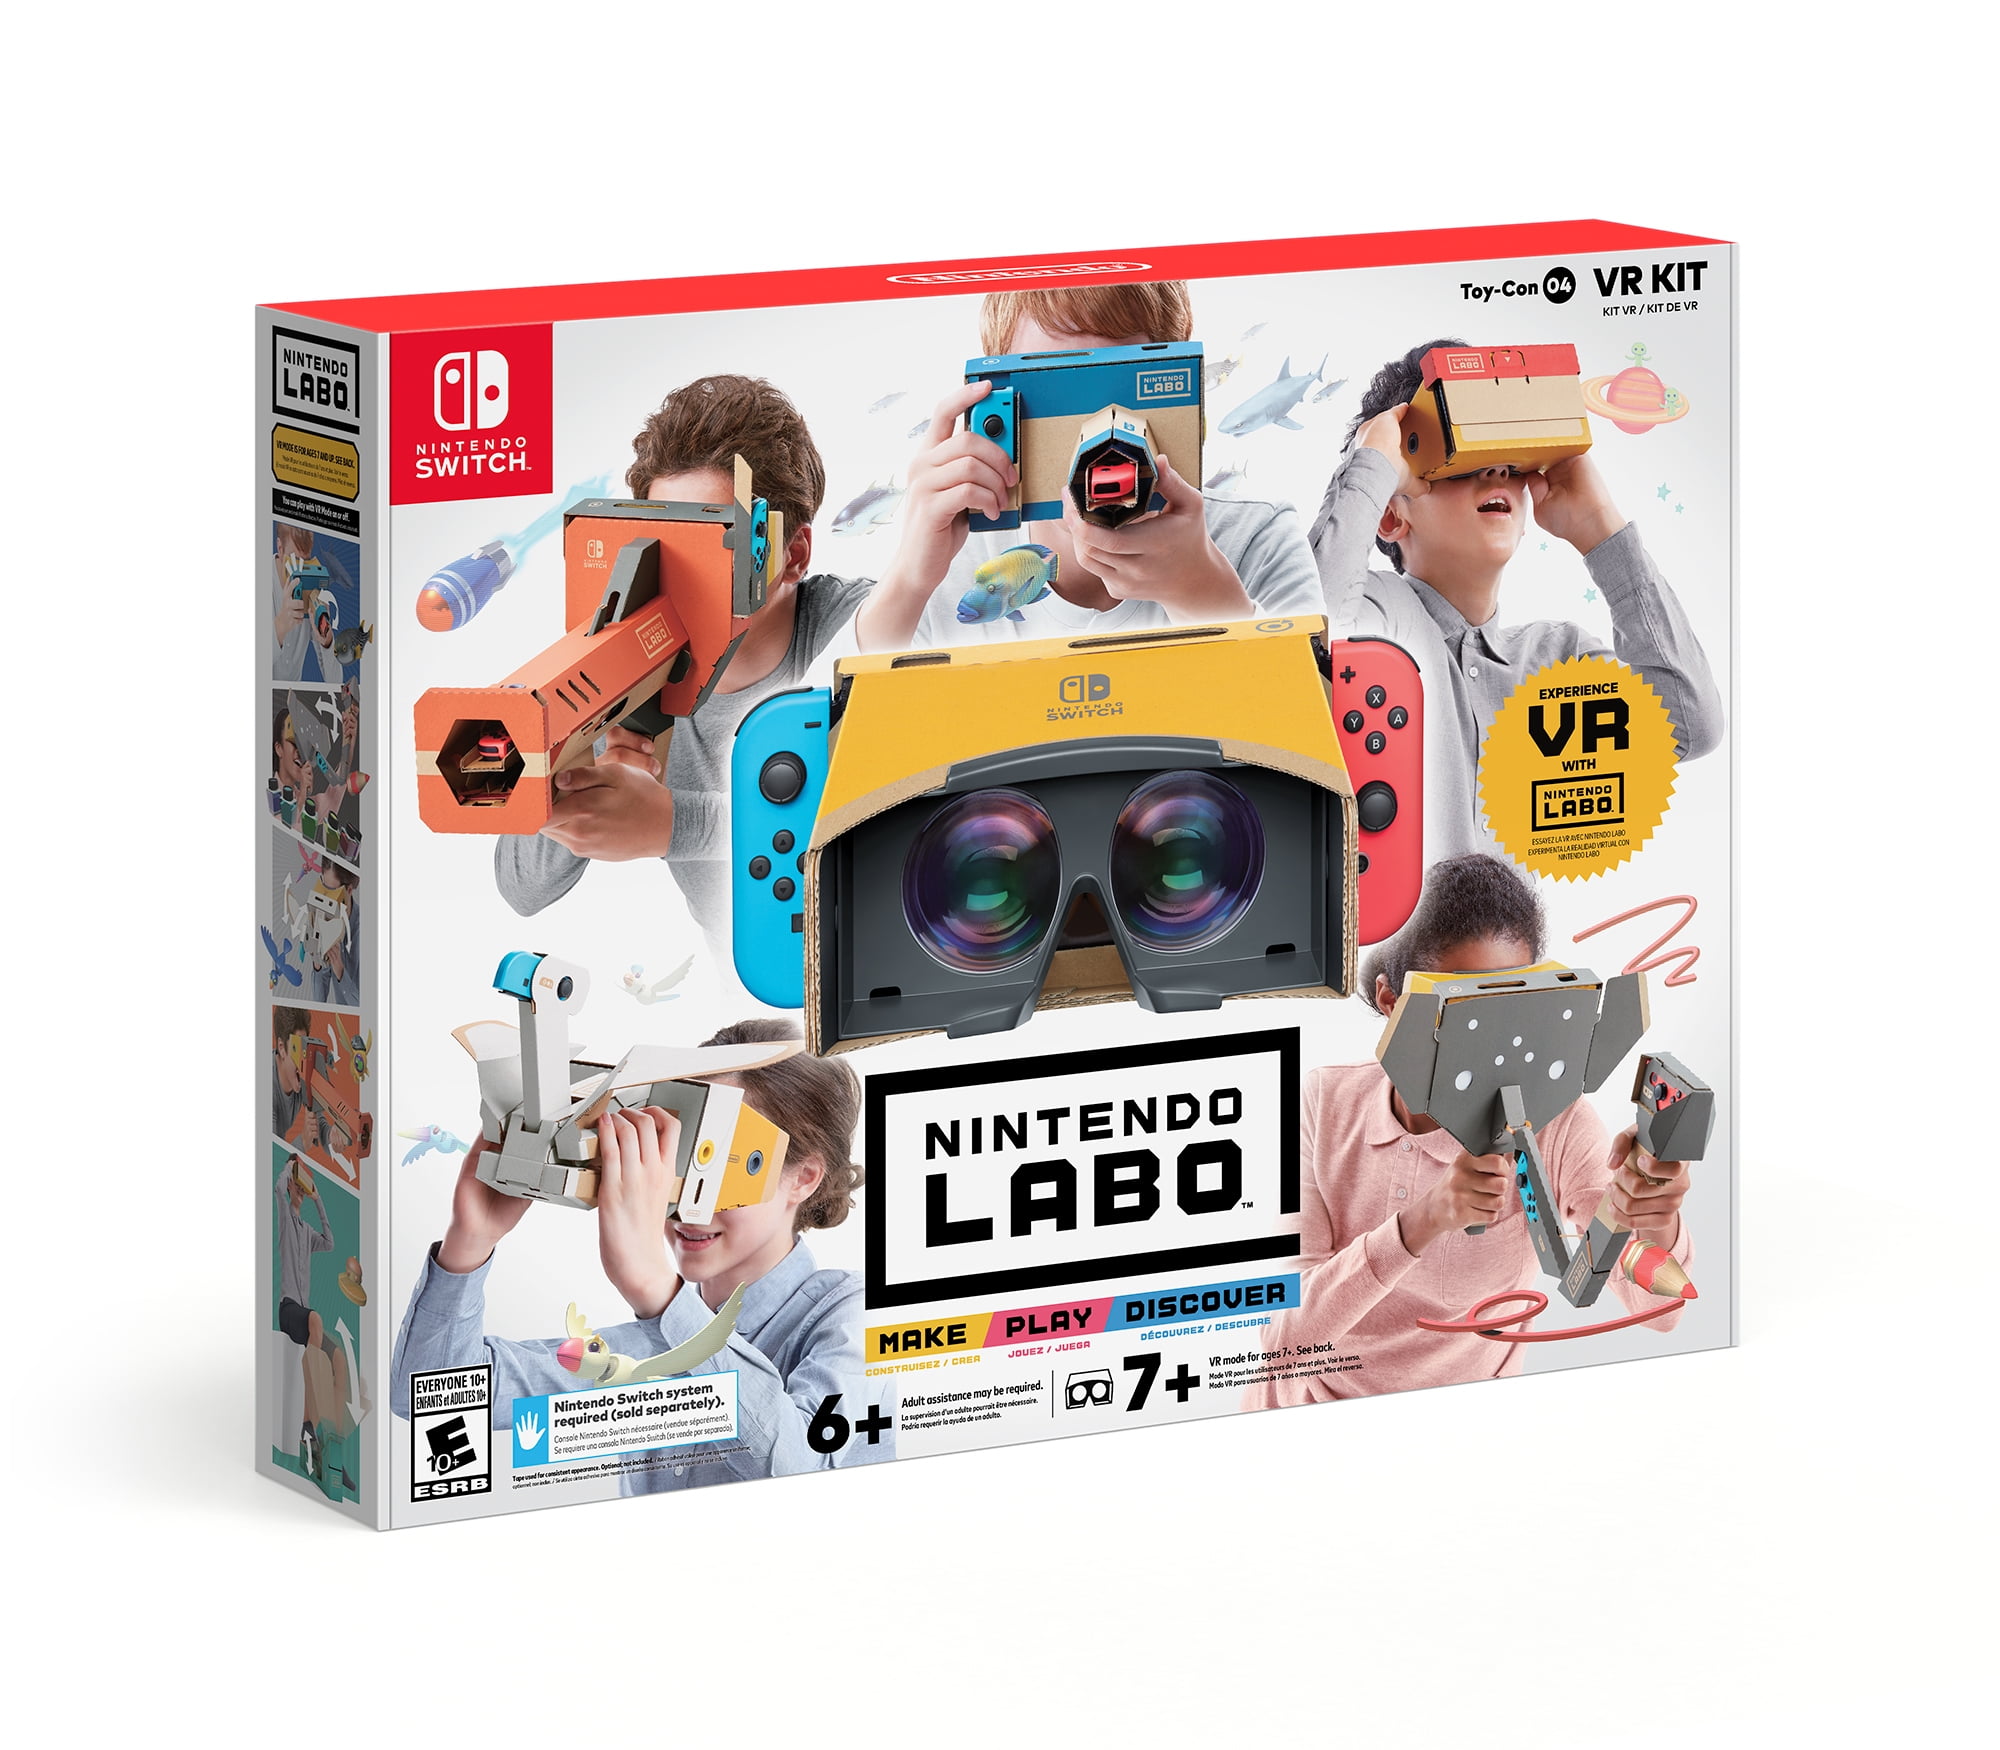 Nintendo Labo Toy Con 04 Vr Kit Walmart Com Walmart Com - roblox experiences get more immersive with expansion into vr with